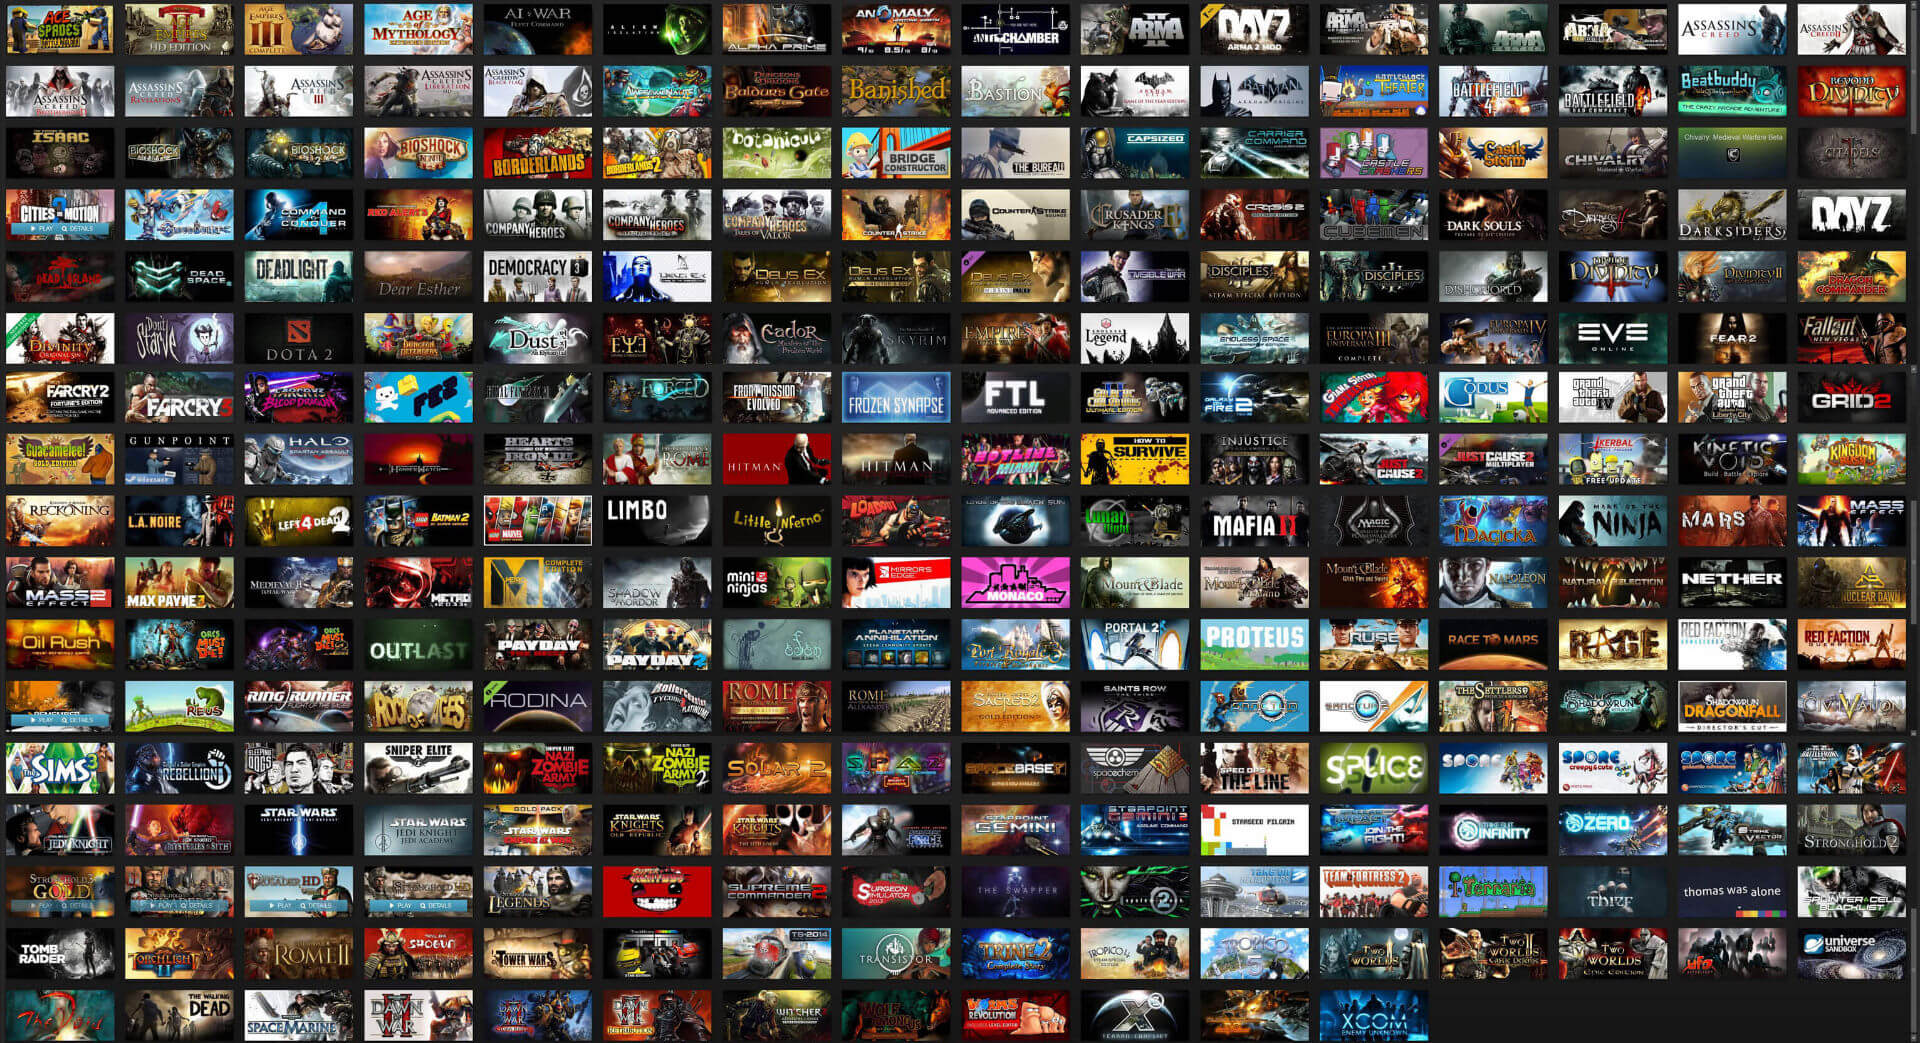 You can resell your Steam games, says French court